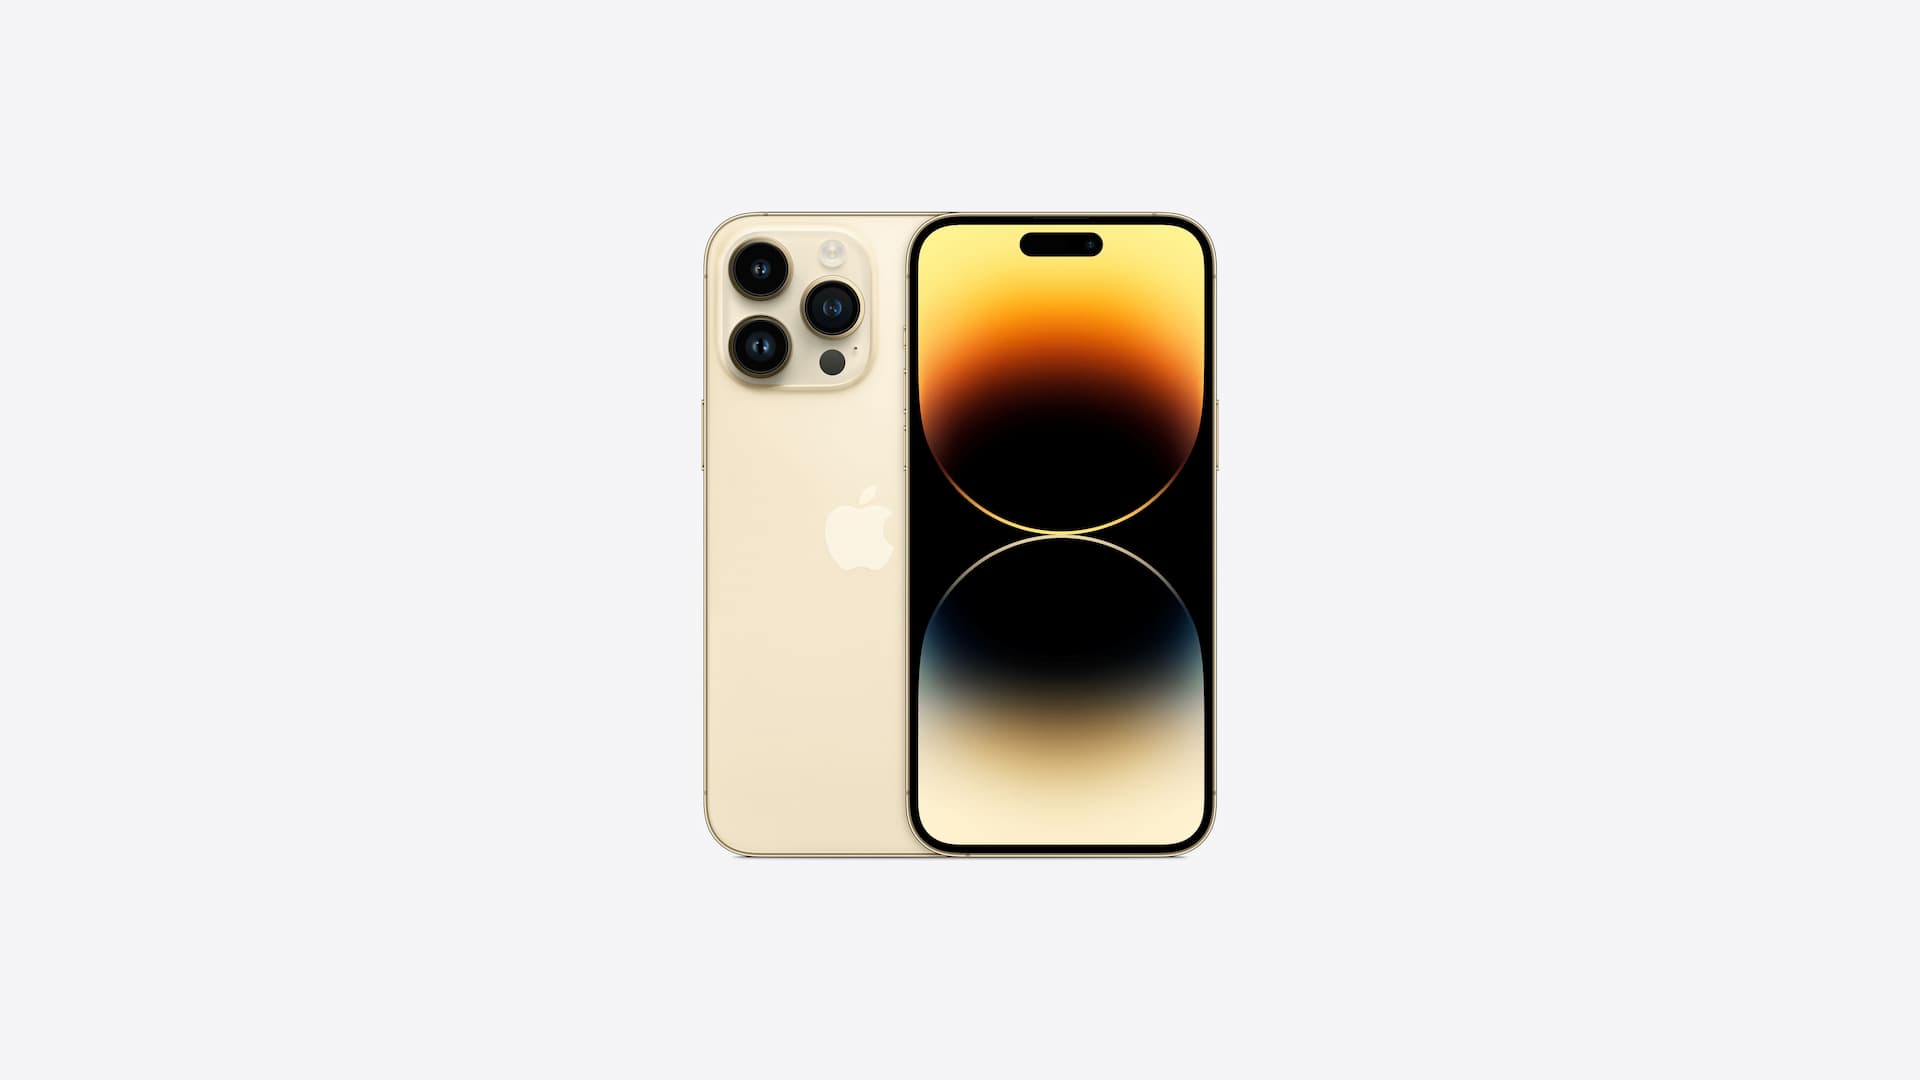 Rumoured introduction of ultra-luxury iPhone in 2024, costlier than the current Pro Max